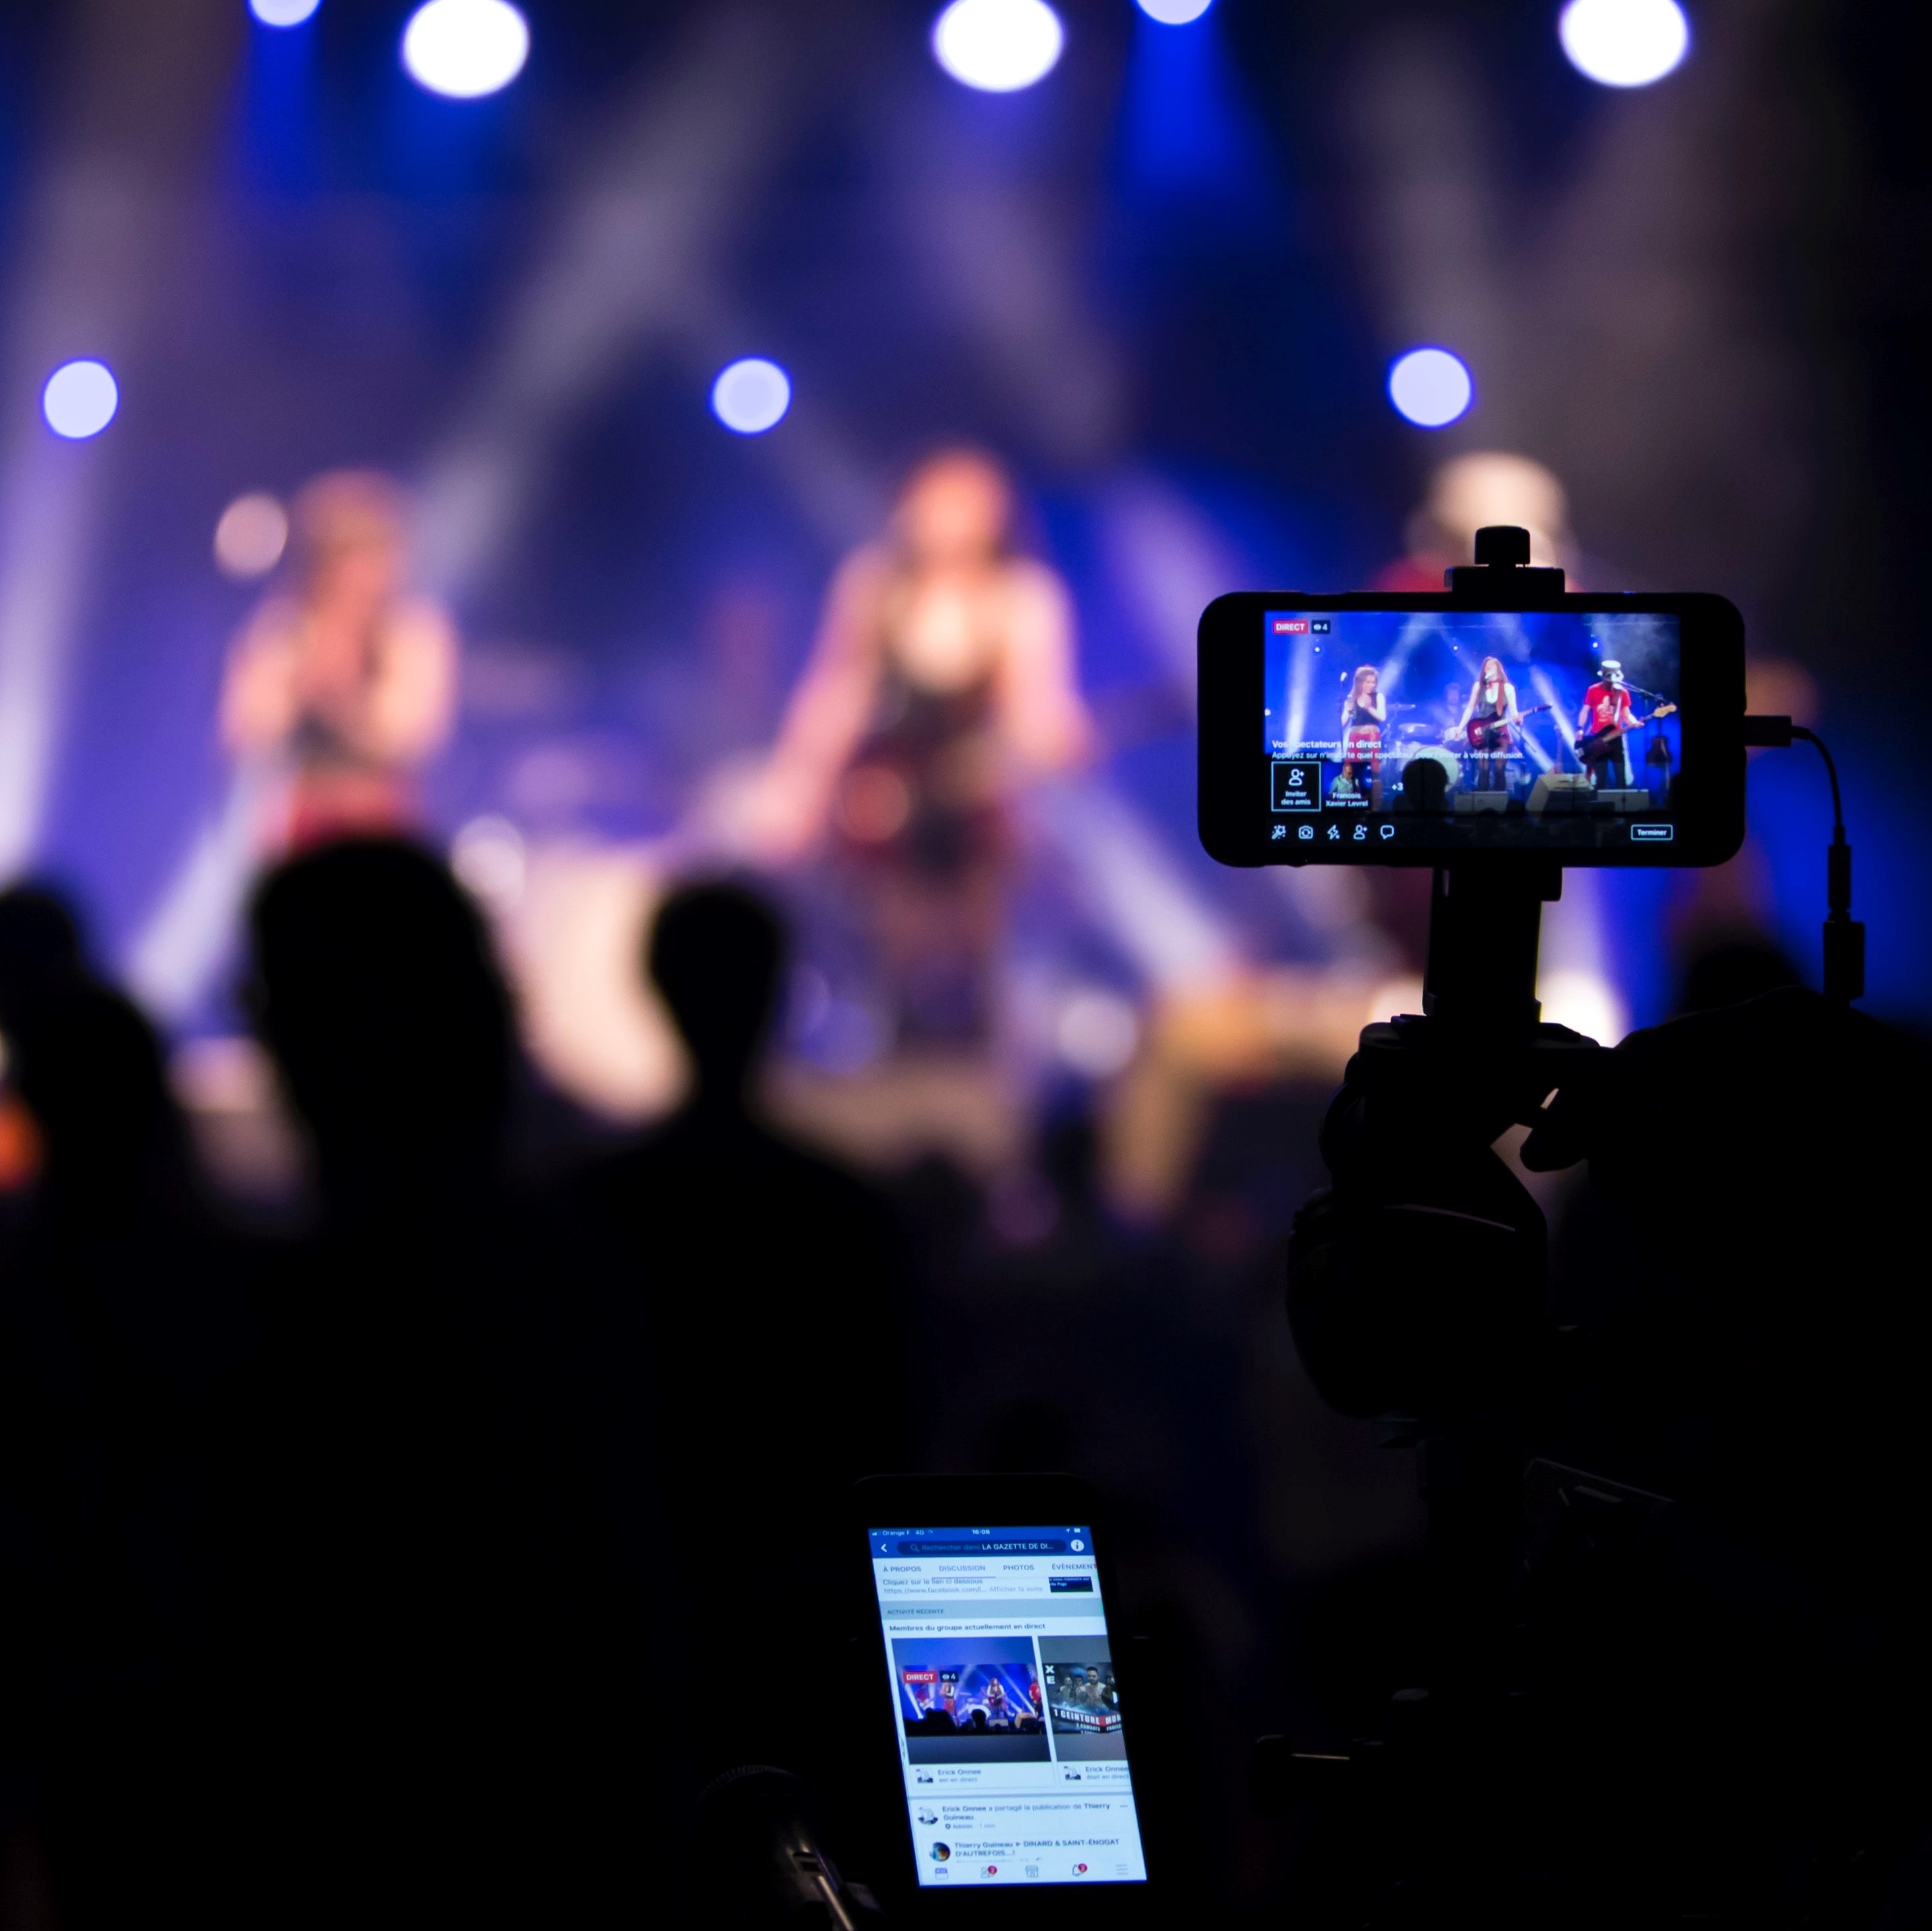 Photograph shows a concert being livestreamed on a camera and phone.